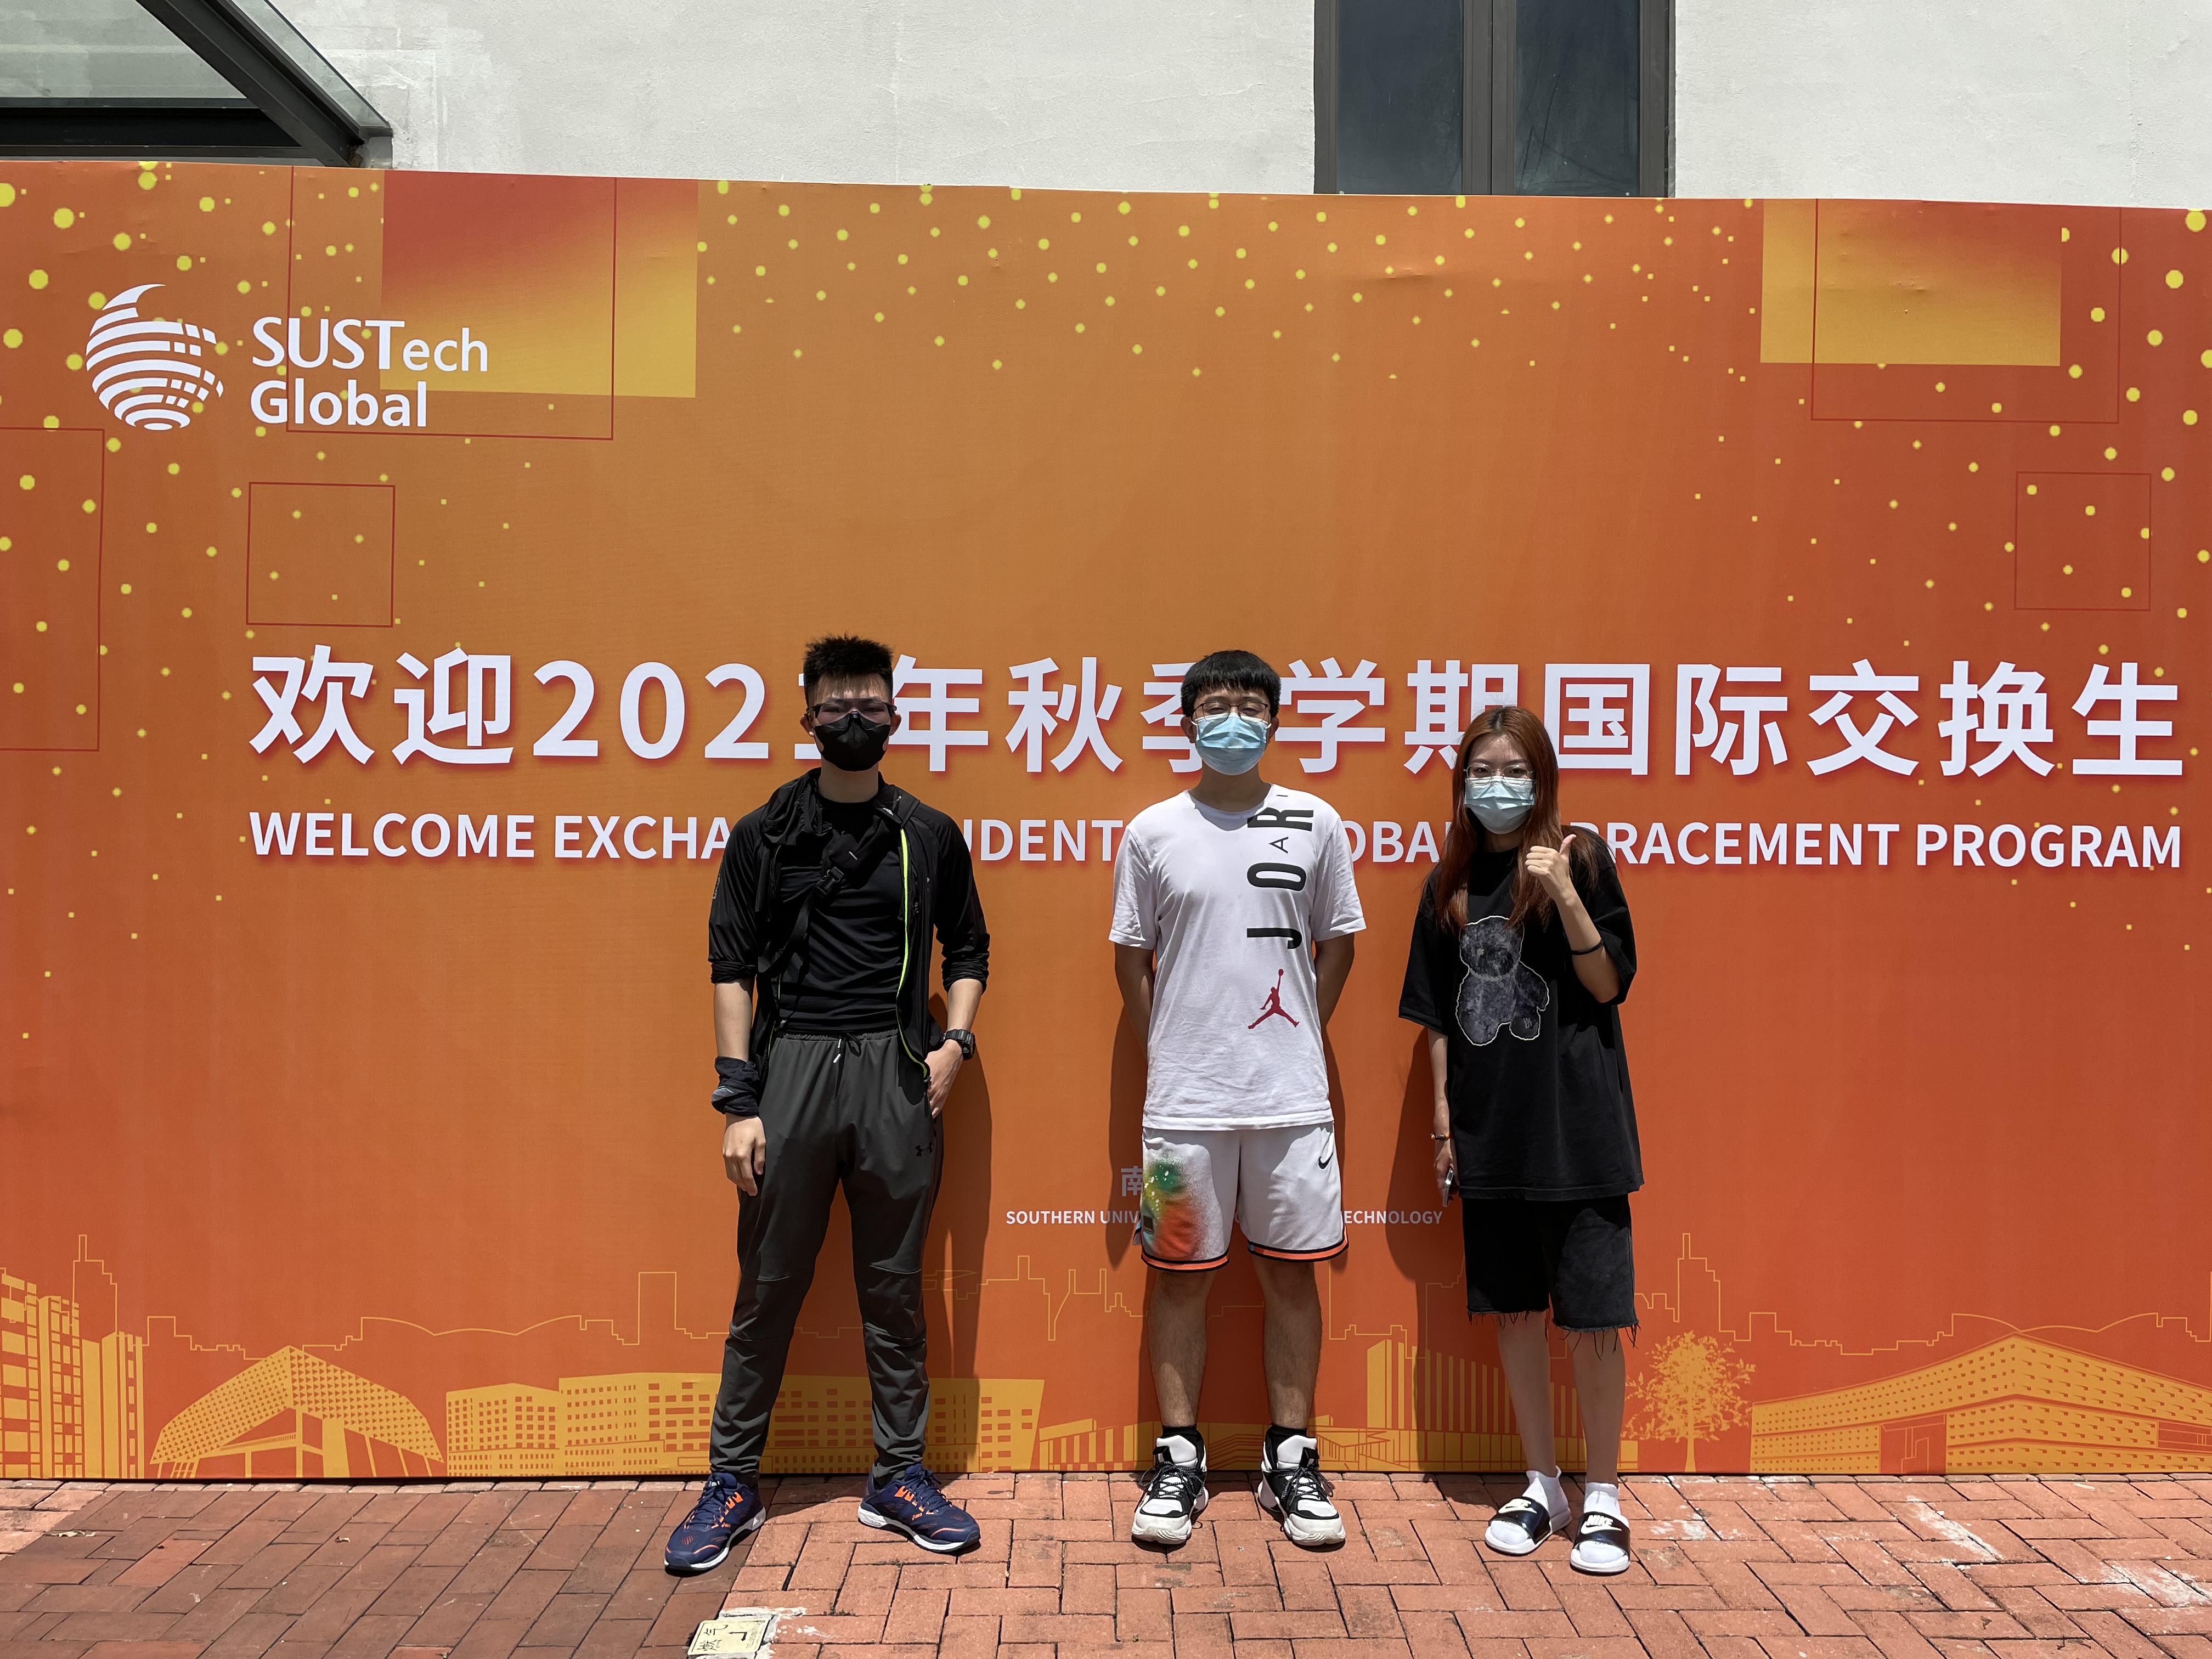 SUSTech welcomes international exchange students for new semester